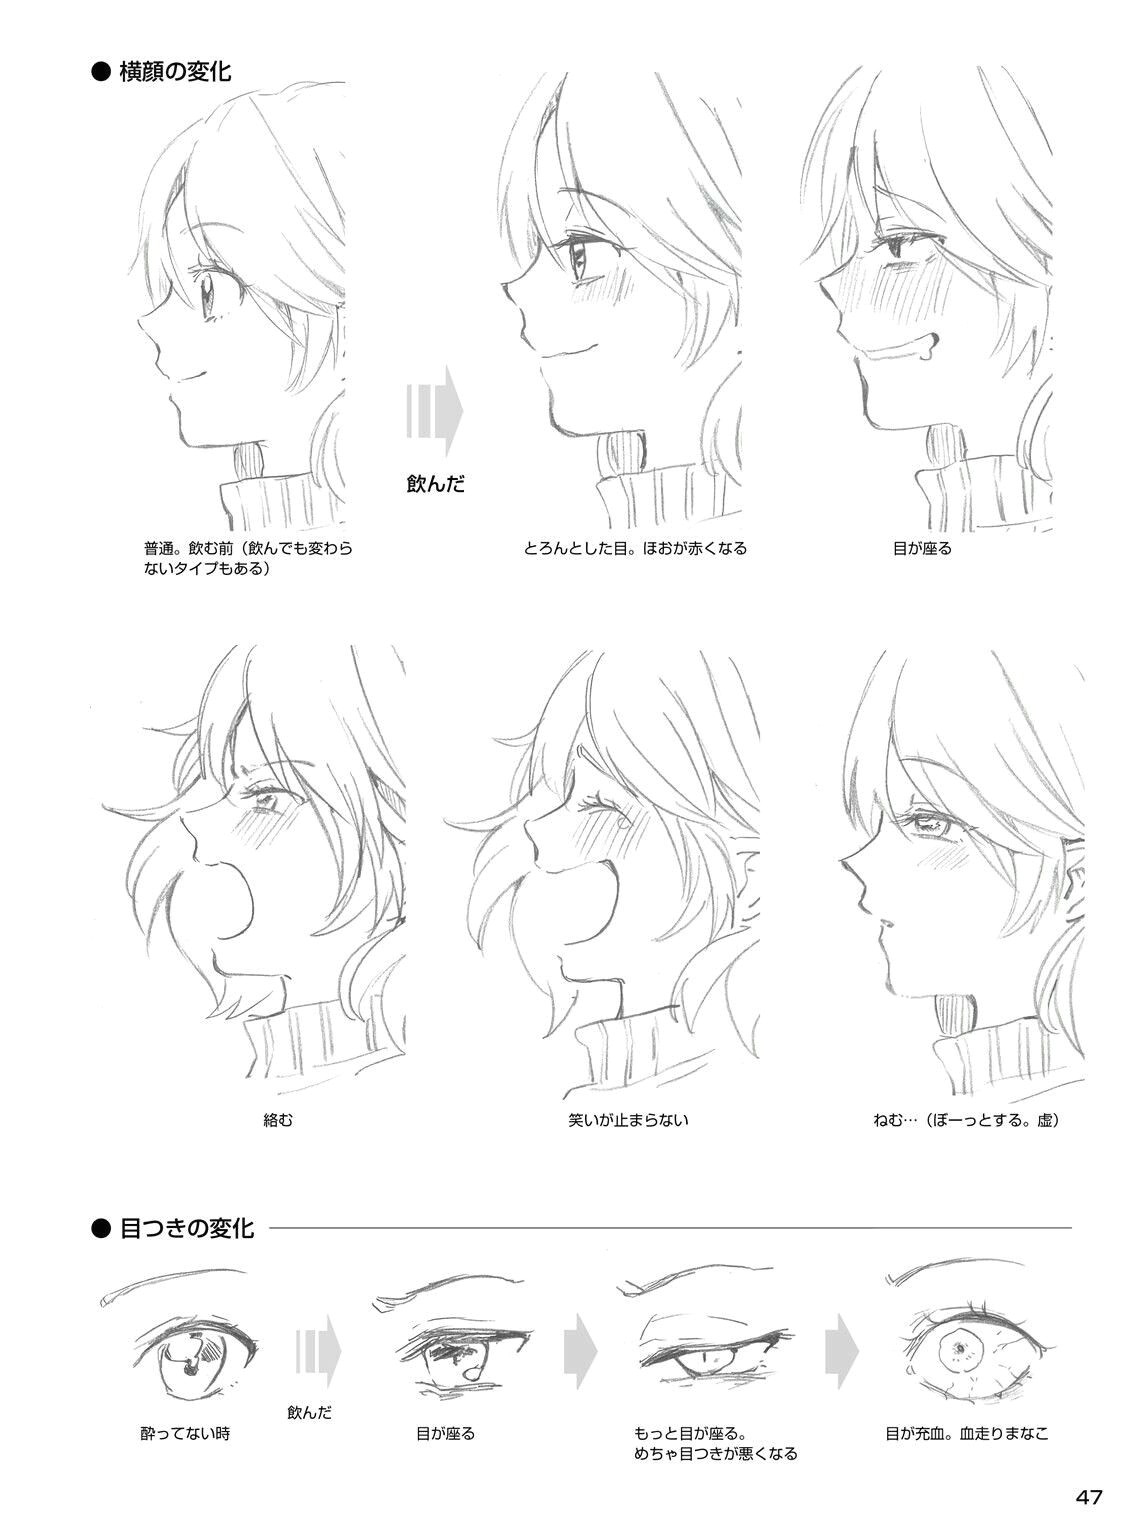 Drawing An Anime Head Pin by Wolf Drawing64 On Anime Manga Art Drawing Tips Pinterest